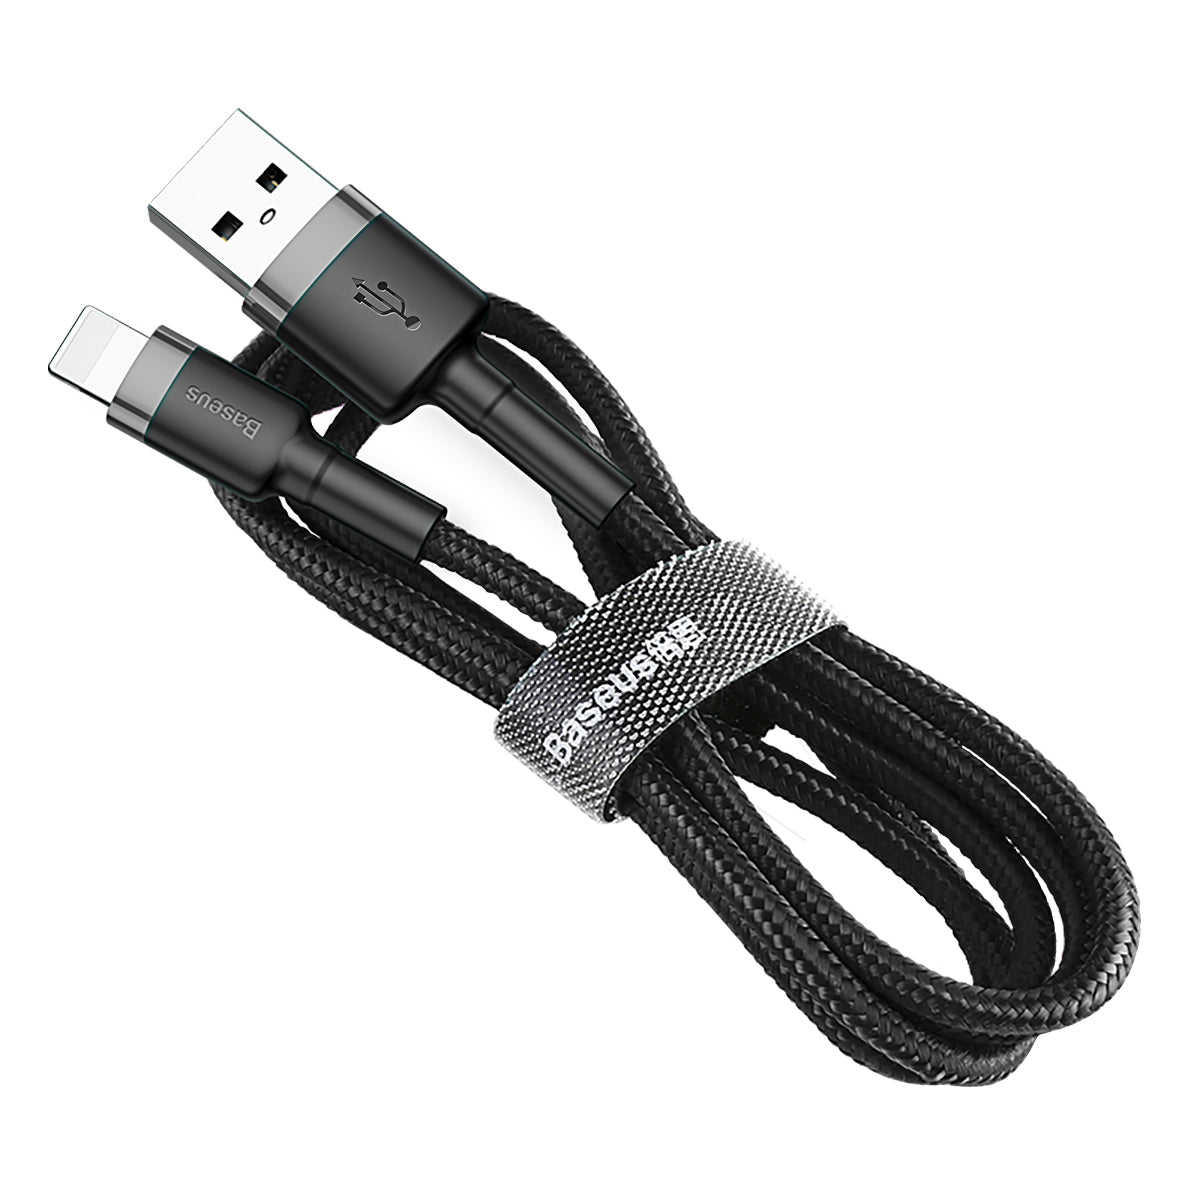 70-4CALKLF-RG1 Lightning Cable 2A 3 Meters, Nylon Braided, Quick Charge